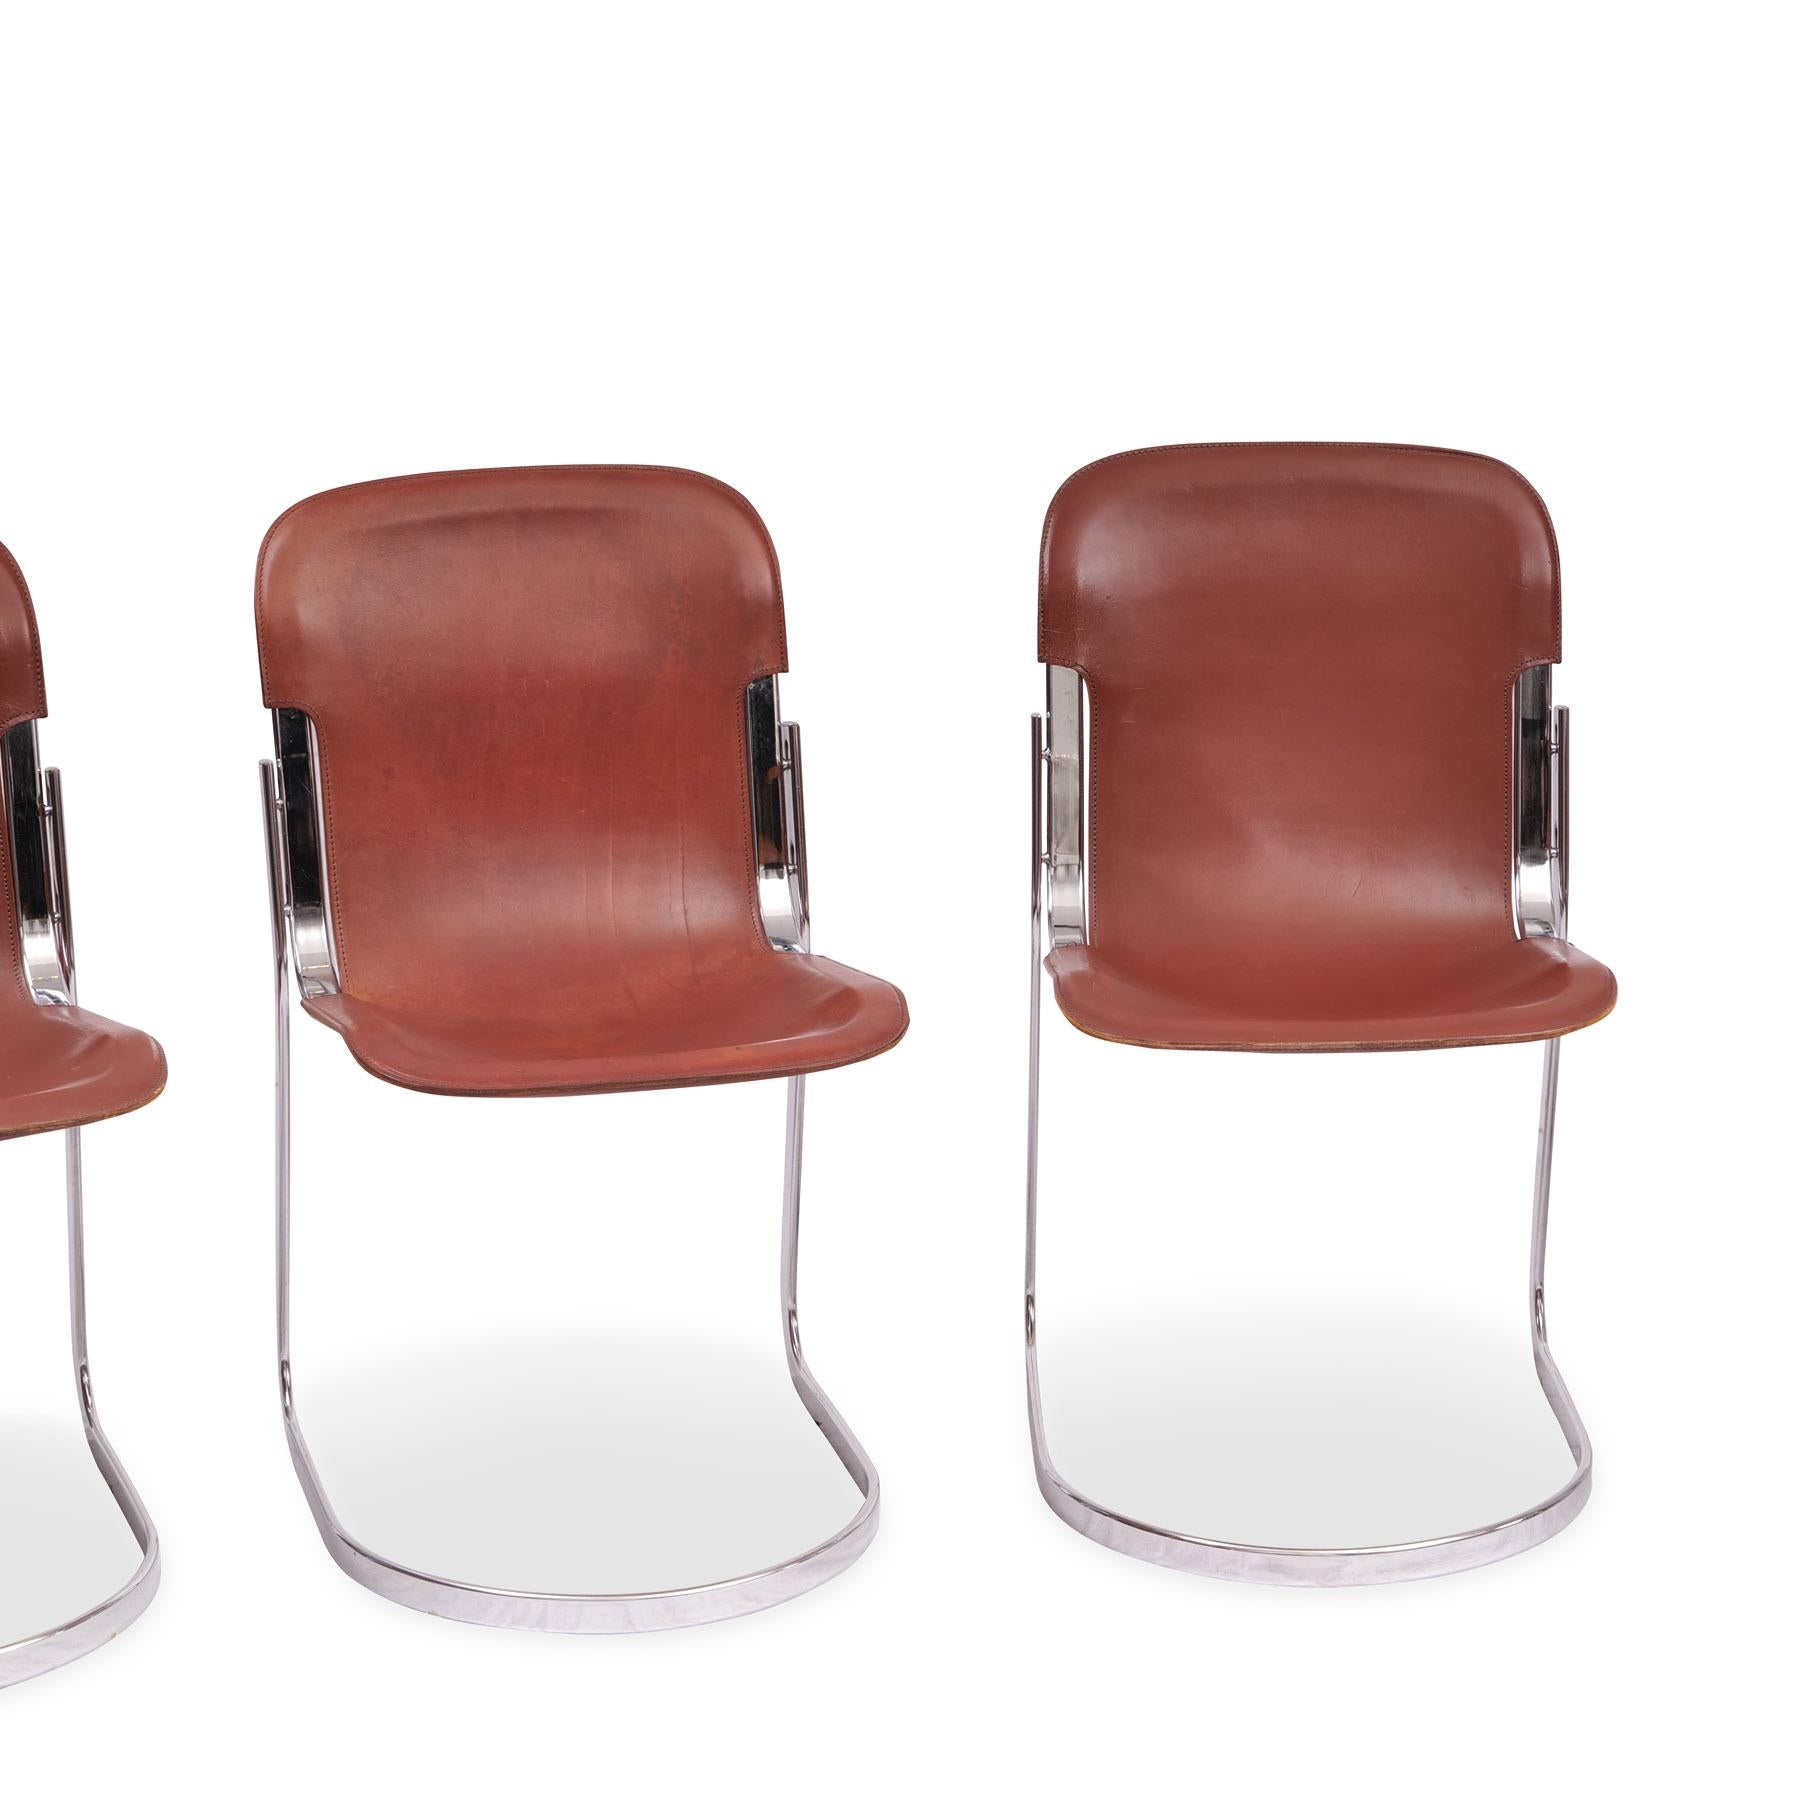 Set of cantilever chairs Willy Rizzo for Cidue
Set of 4 chairs, Italy 1970s, design Willy Rizzo (1928 Naples - 2013 Paris), manufacturer Cidue, cognac-colored leather and chrome-plated metal, beautiful vintage condition
Height 80 cm, width 44 cm,